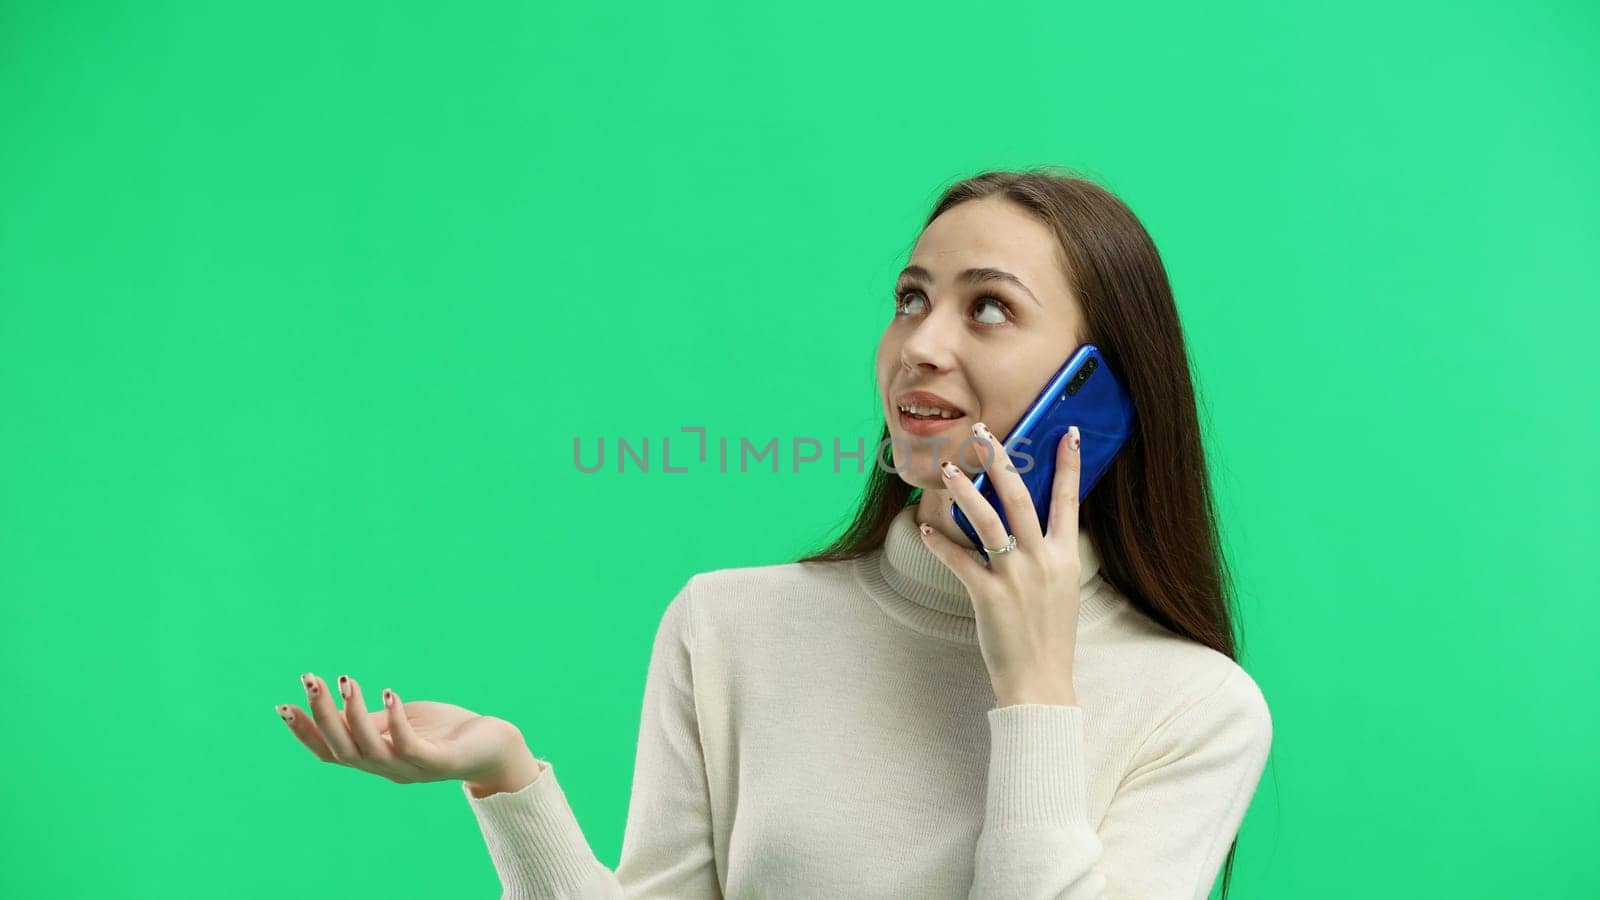 A woman, close-up, on a green background, talking on the phone.